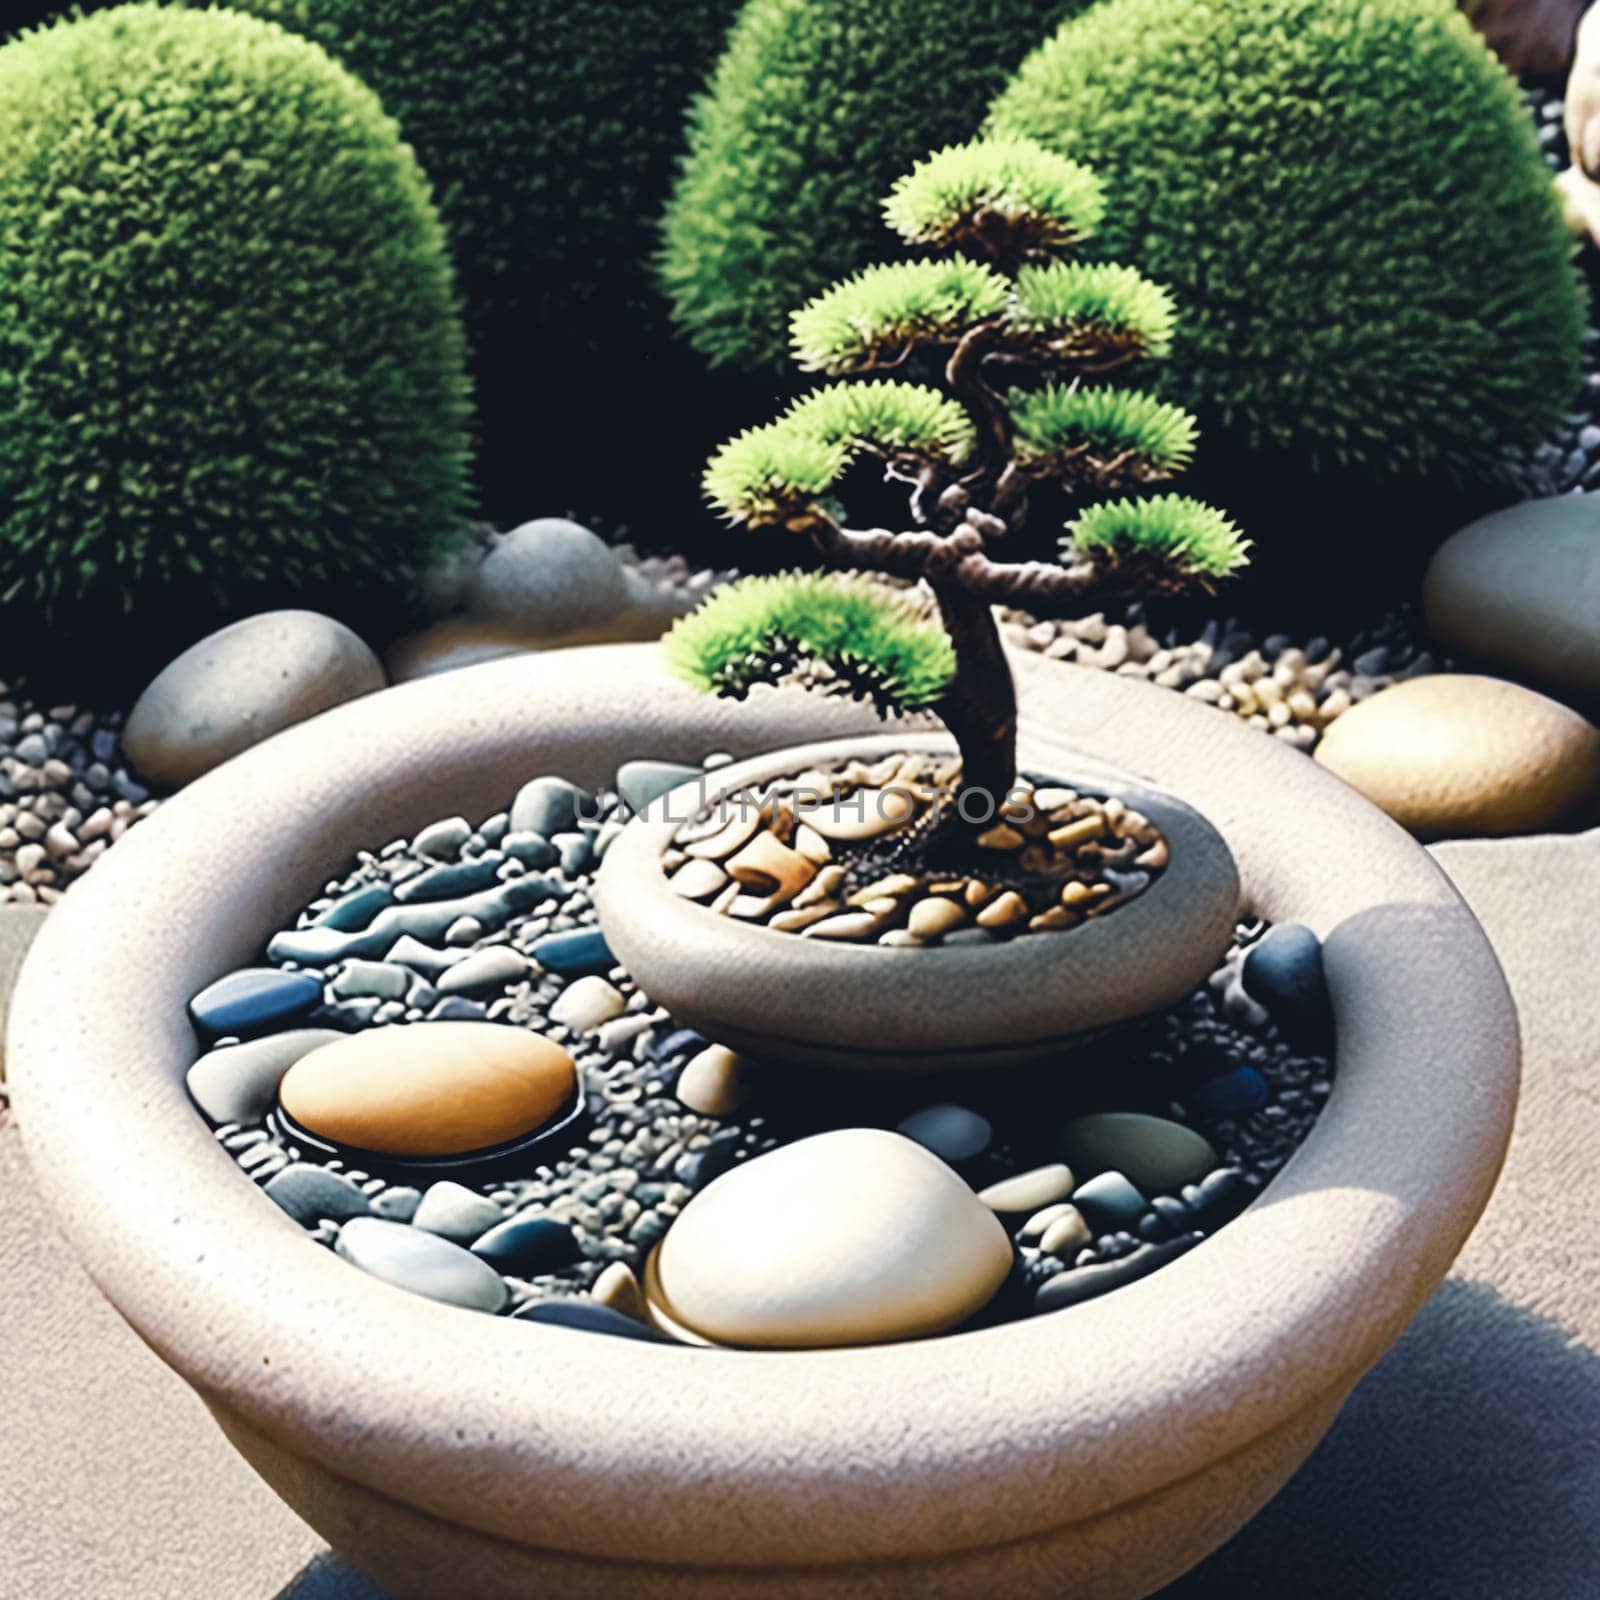 Mindfulness Moment. Capture the essence of mindfulness and meditation by photographing a zen garden with carefully arranged pebbles, a miniature bonsai tree, and a tranquil water fountain to evoke a sense of peace and balance.